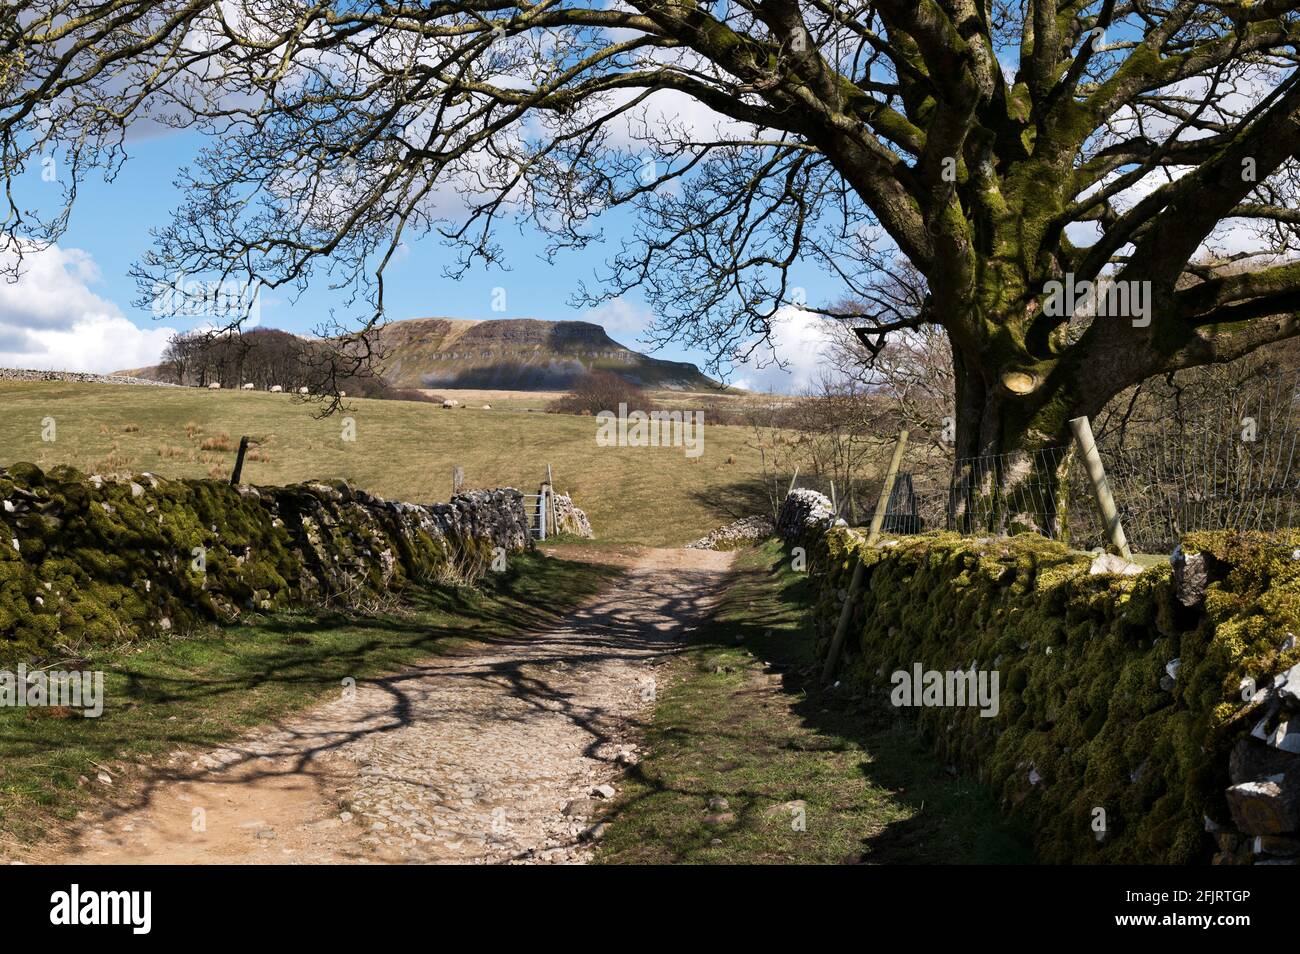 Pen-y-ghent seen from The Pennine Way, Horton-in-Ribblesdale, Yorkshire Dales National Park, UK Stock Photo